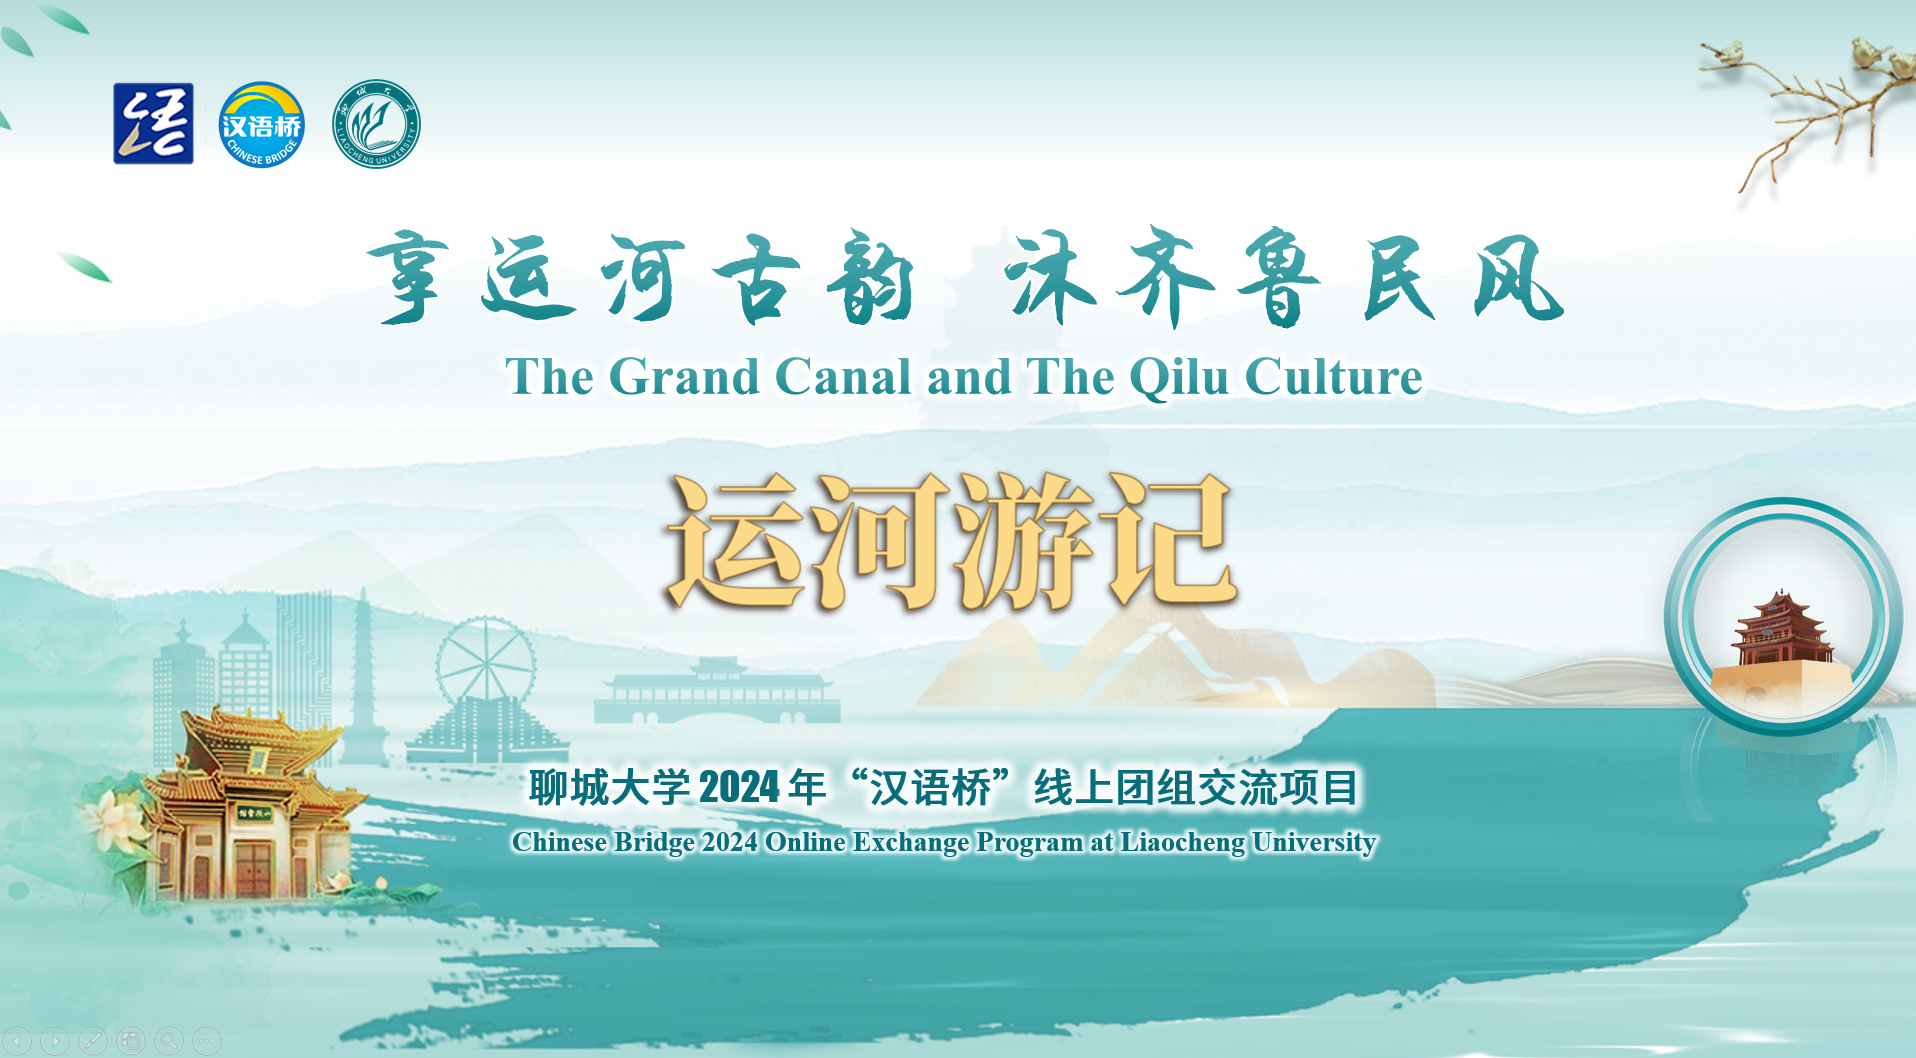 A Cultural Tour of the Grand Canal